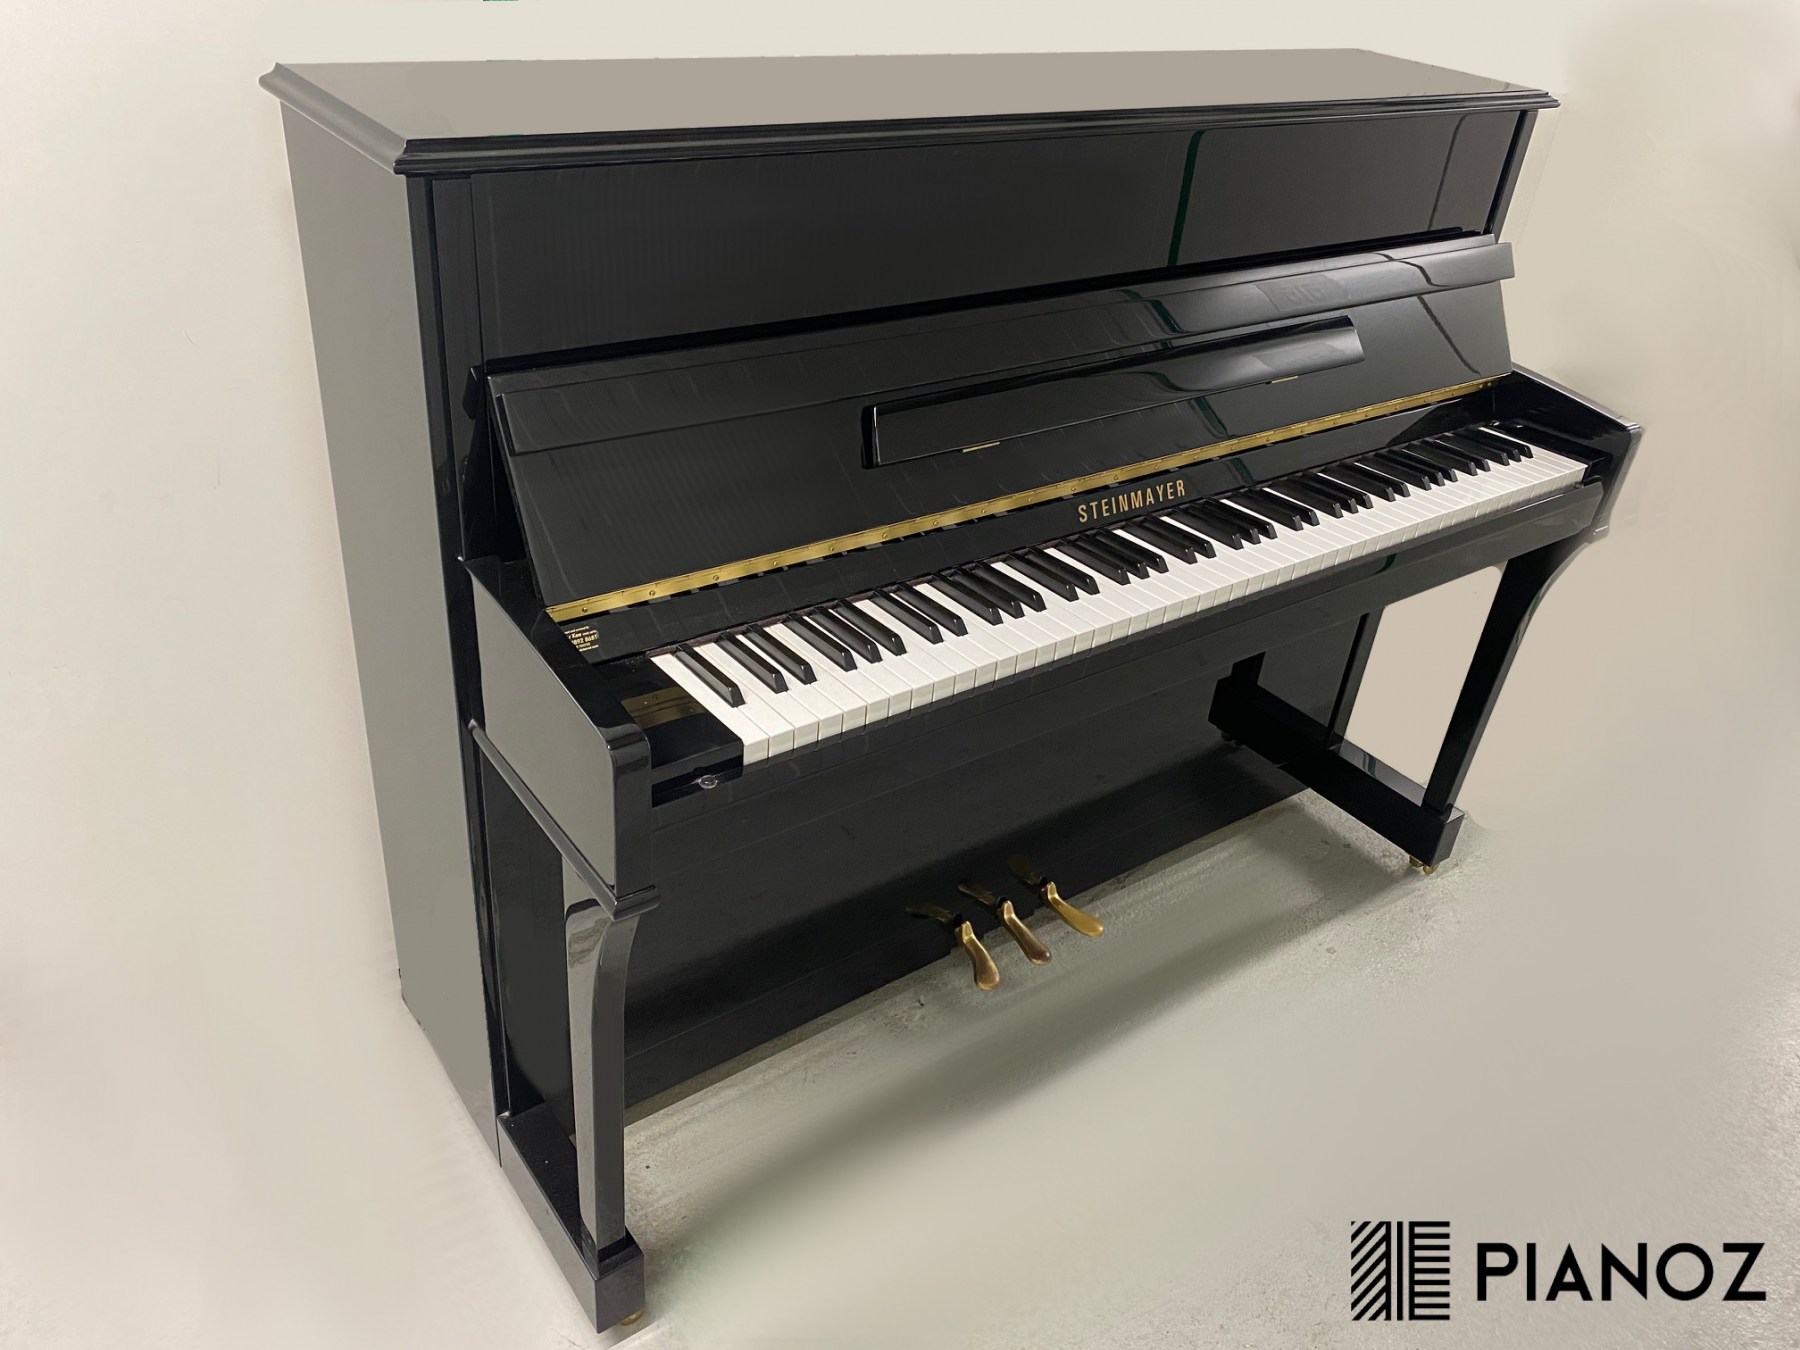 Steinmayer 110 Black Gloss Upright Piano piano for sale in UK